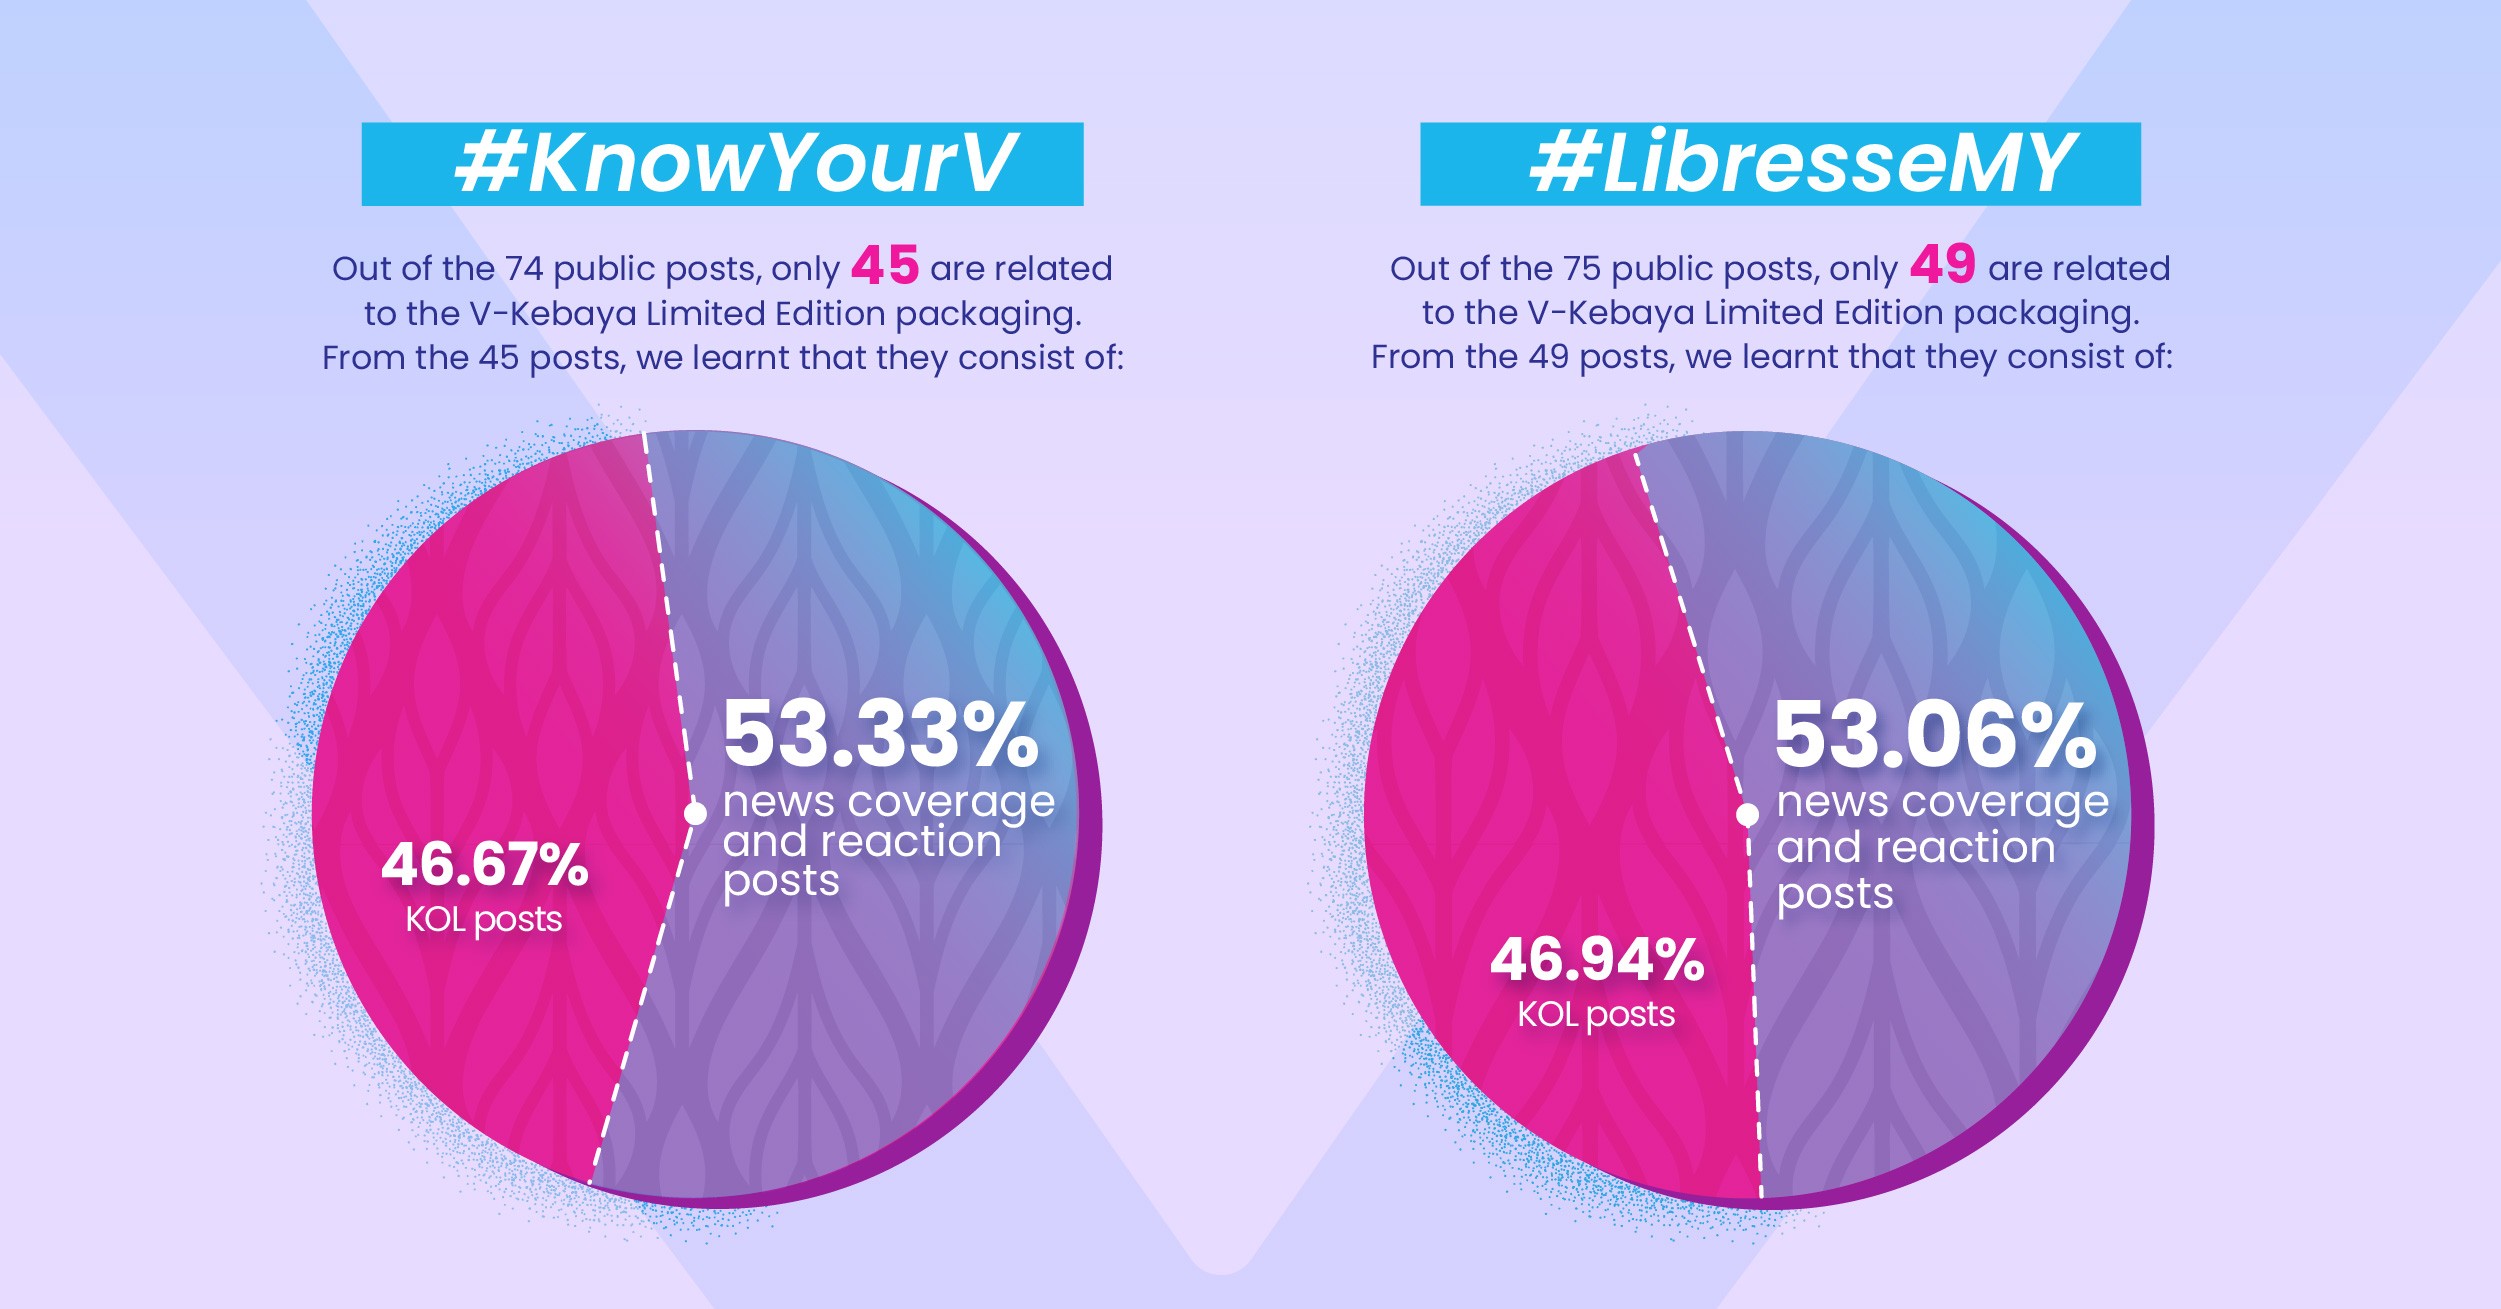 Analysis of Instagram posts using the hashtags #LibresseMY and #KnowYourV